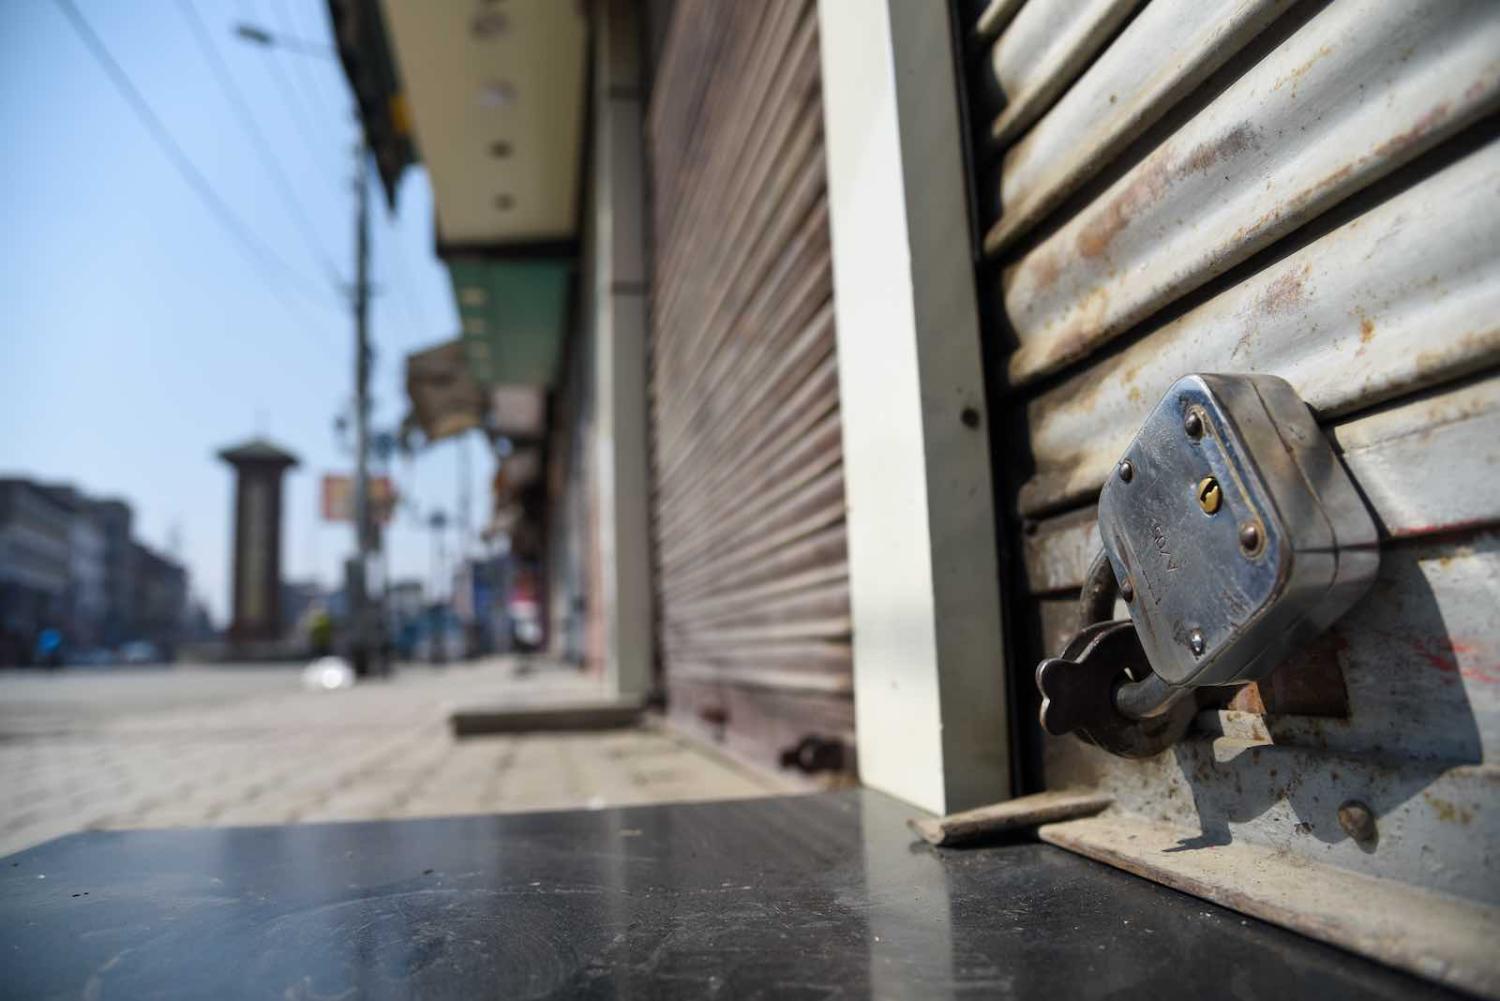 Closed shops in Srinagar during the lockdown (Photo: Idrees Abbas via Getty Images)